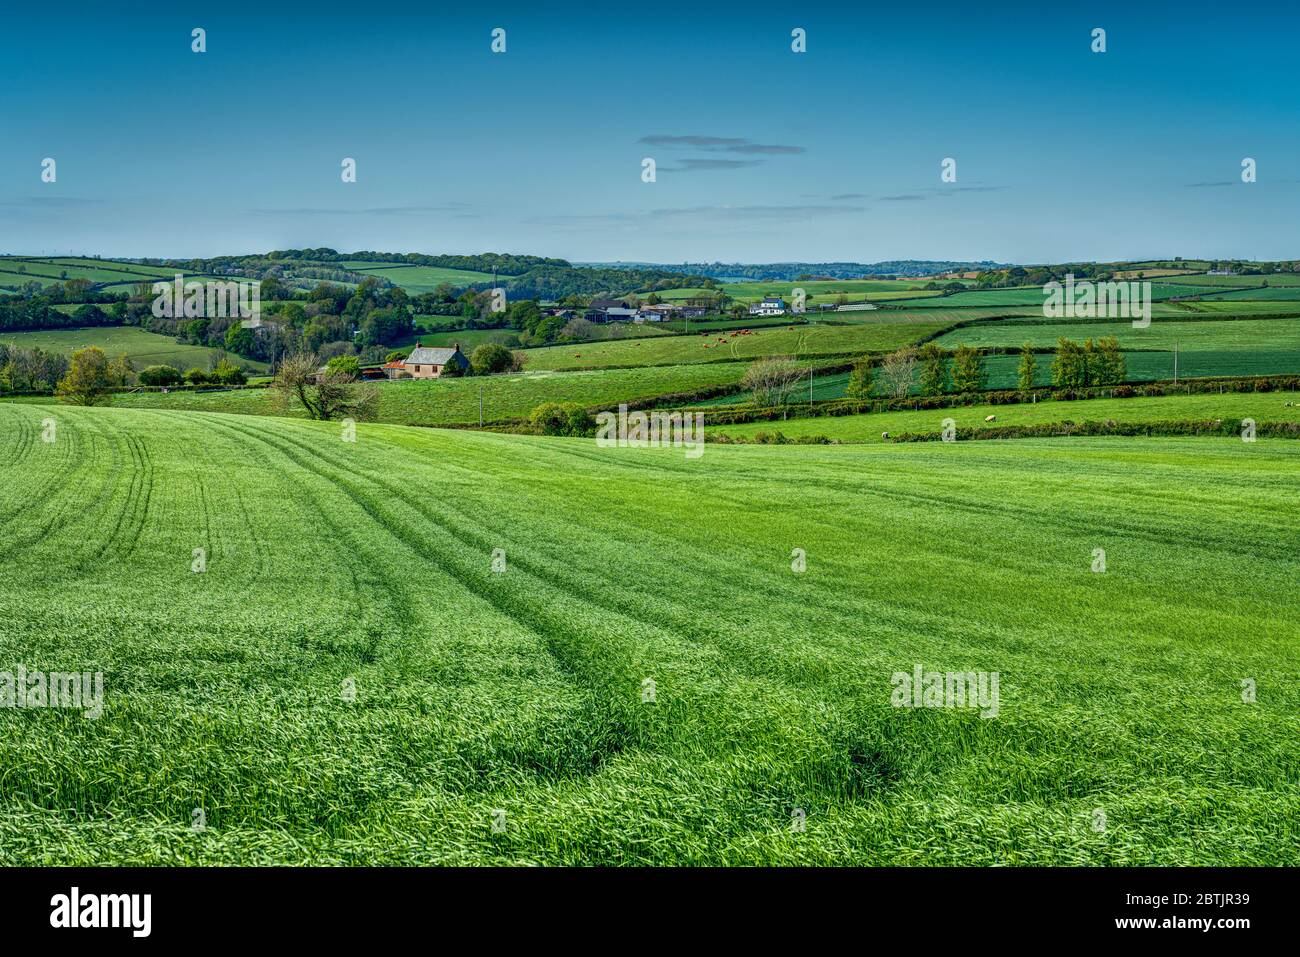 A very green Spring Barley crop with large tractor lines taking your eye into a lovely patchwork of Cornish farmsteads in gently rolling countryside. Stock Photo